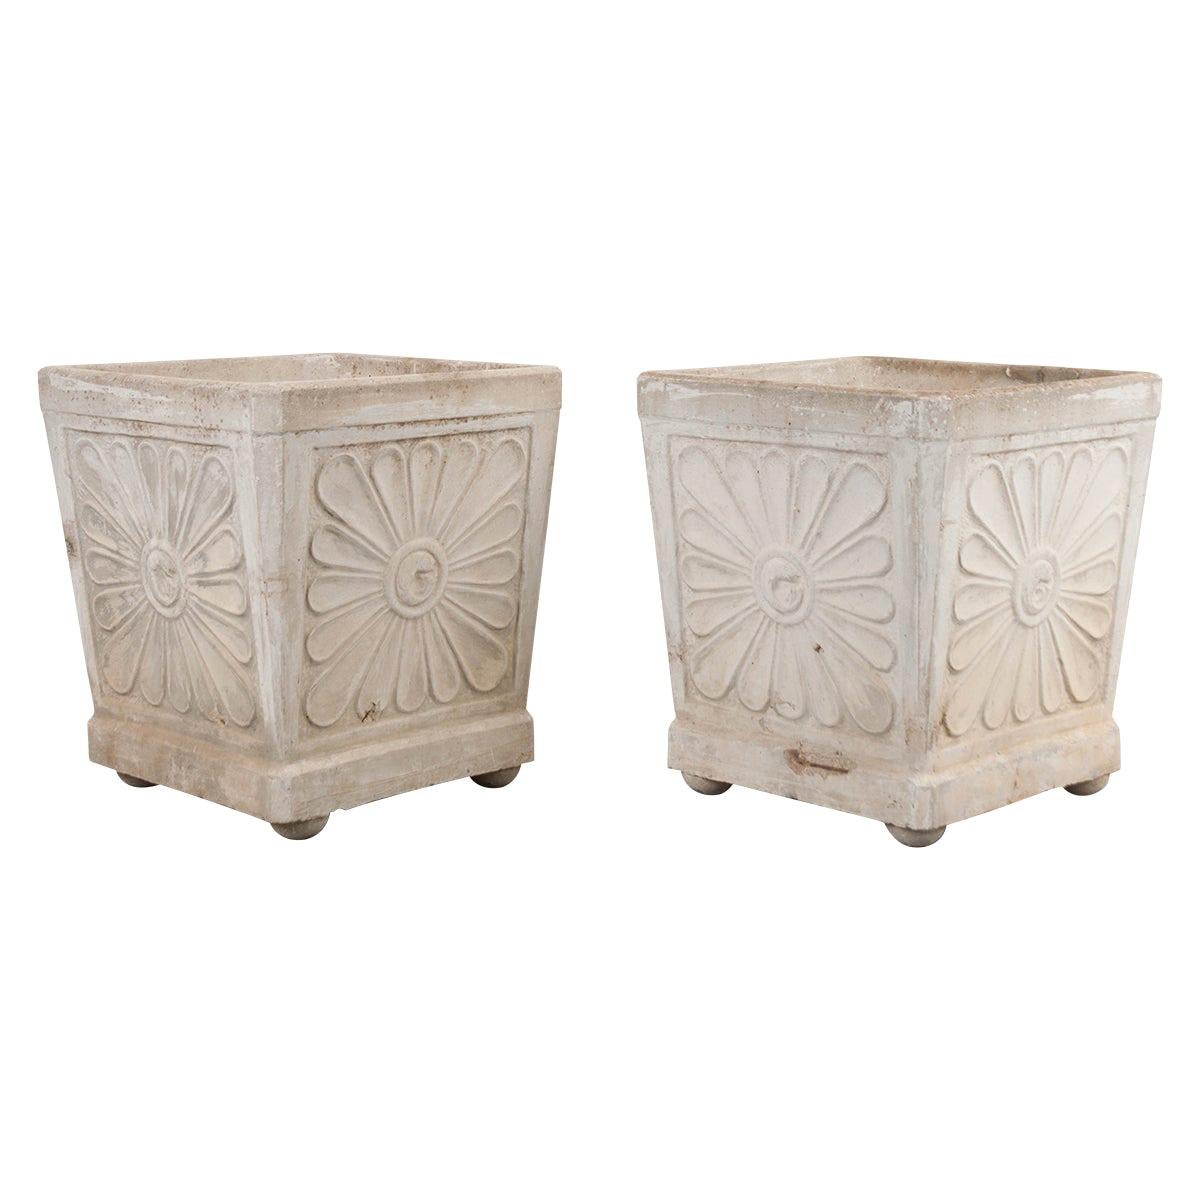 Pair of French Vintage Concrete Planters